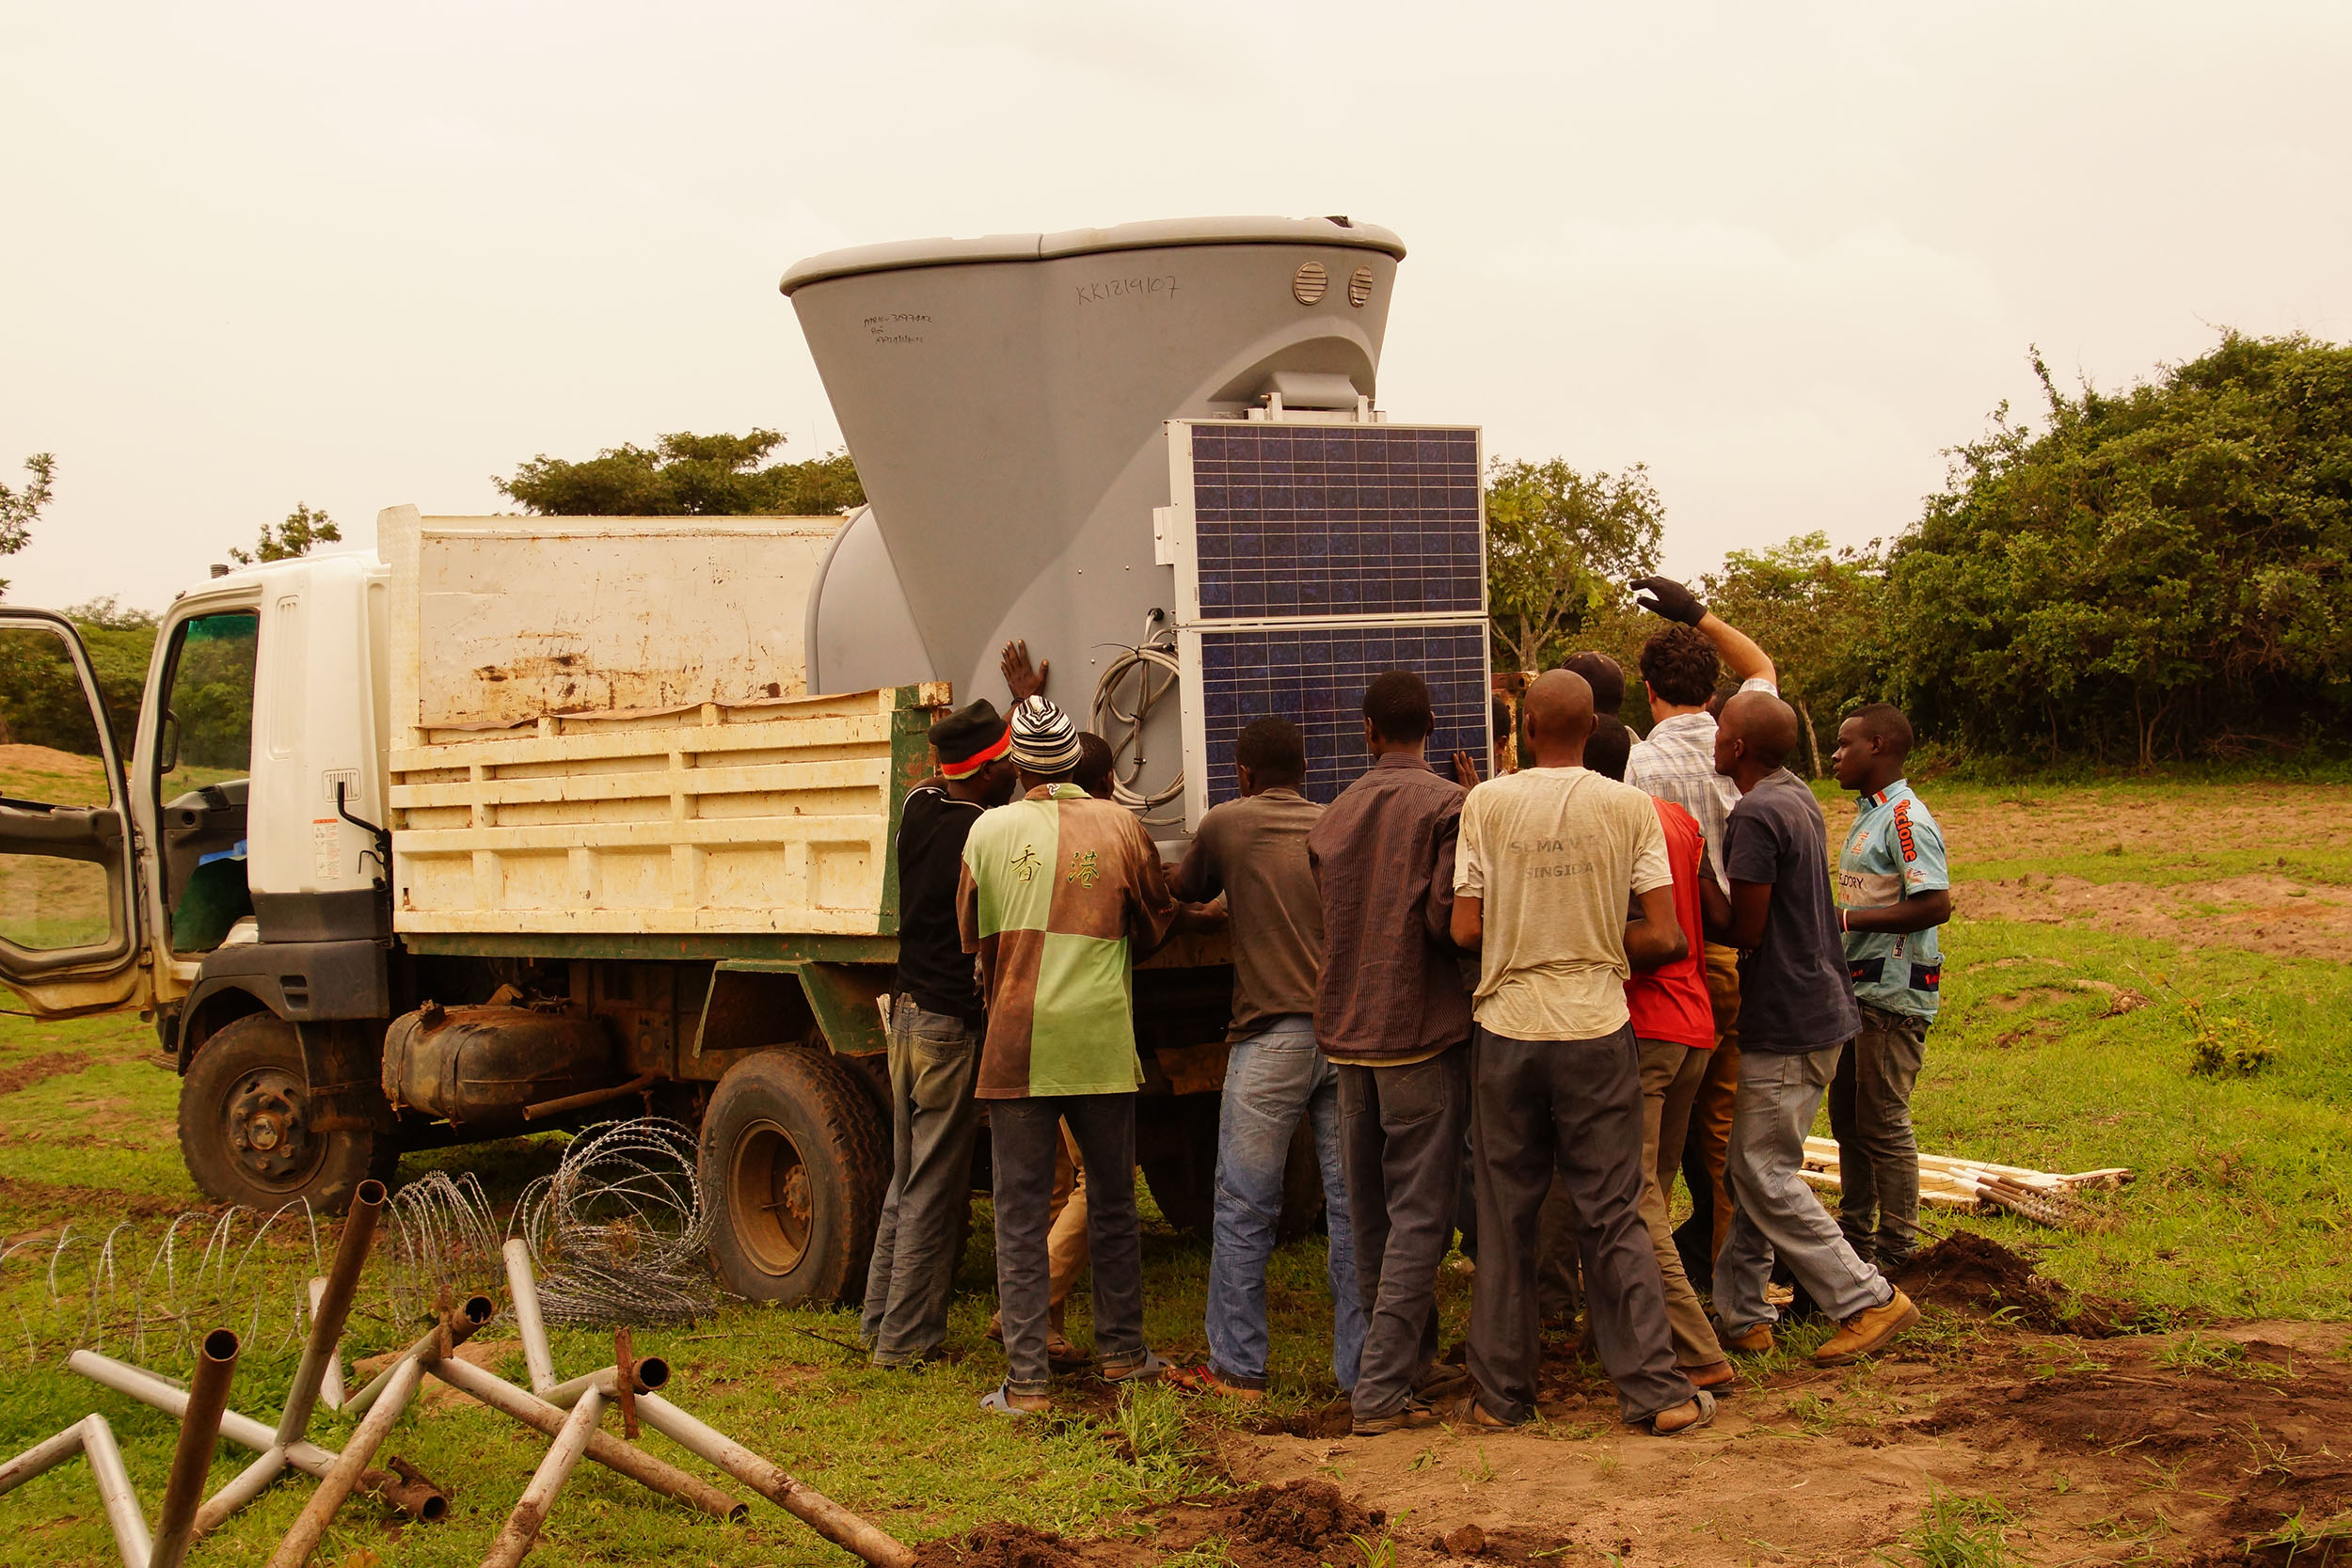 The team loads a SODAR unit and its solar panel onto a truck to move it to another location. The two SODAR units on site are moved periodically to provide additional wind data from multiple locations across wind farm site.